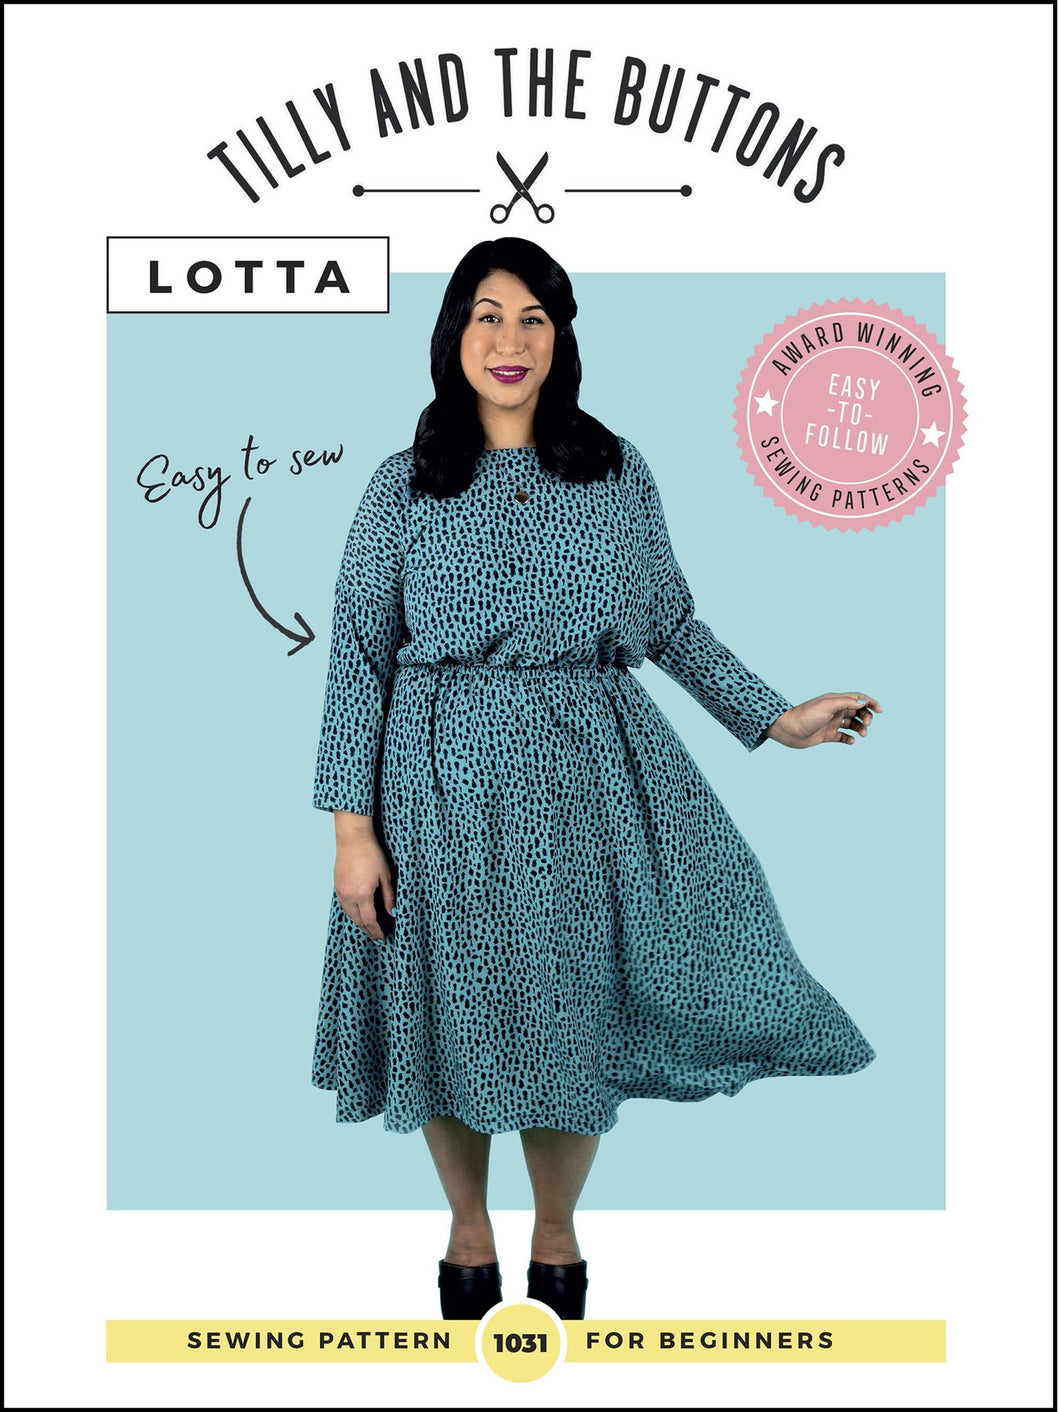 Tilly and The Buttons - Lotta was £14.50 now £10